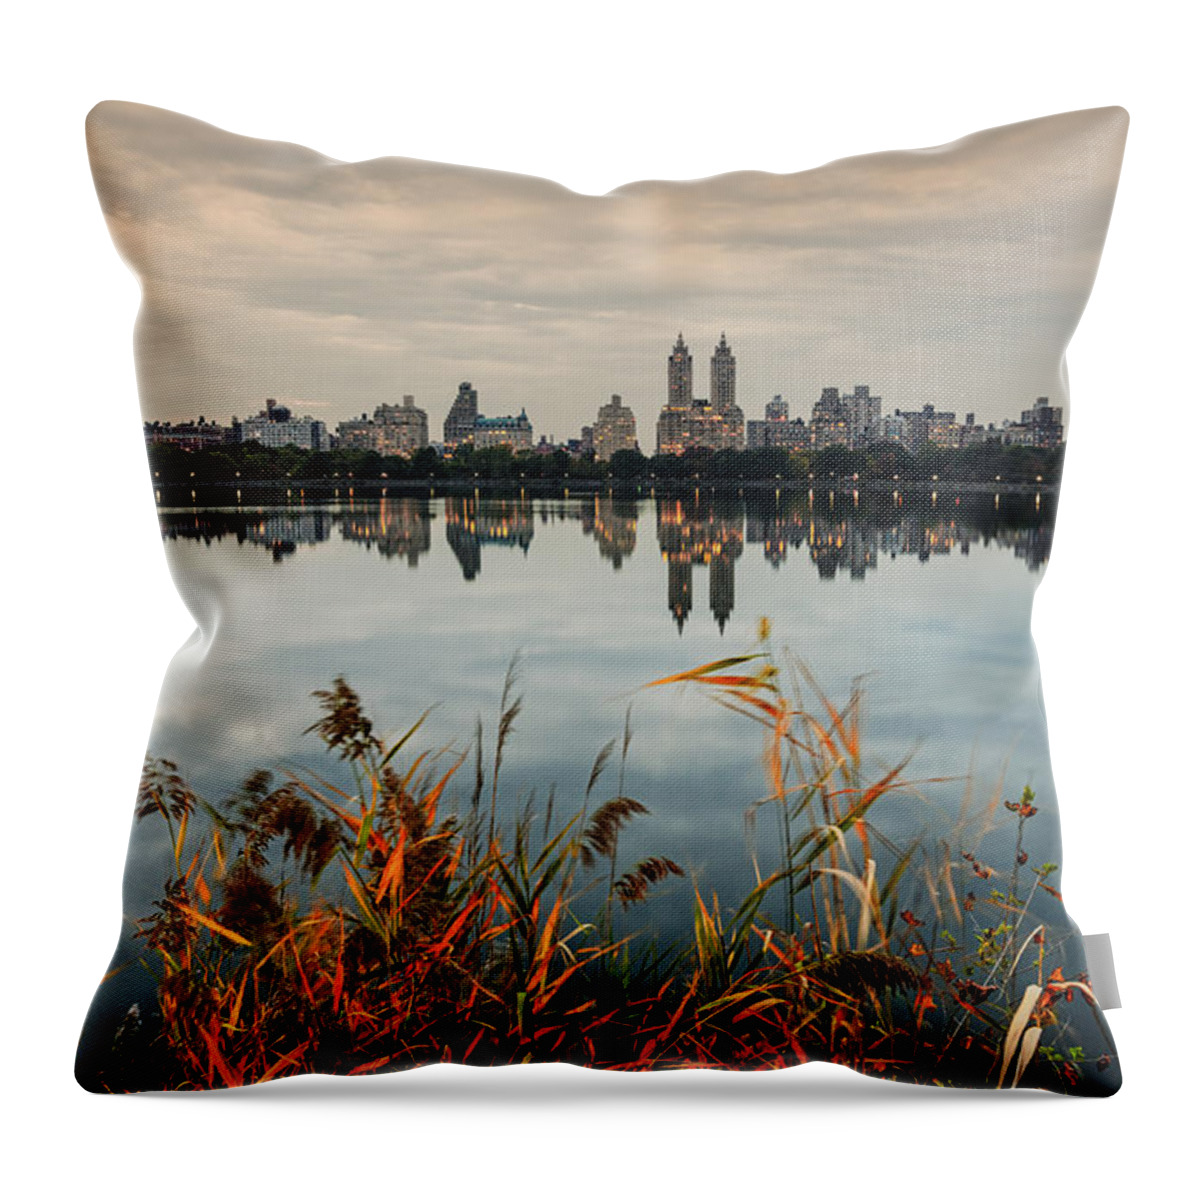 Central Park Throw Pillow featuring the photograph The View across JKO reservoir Central Park New York by Silvio Ligutti